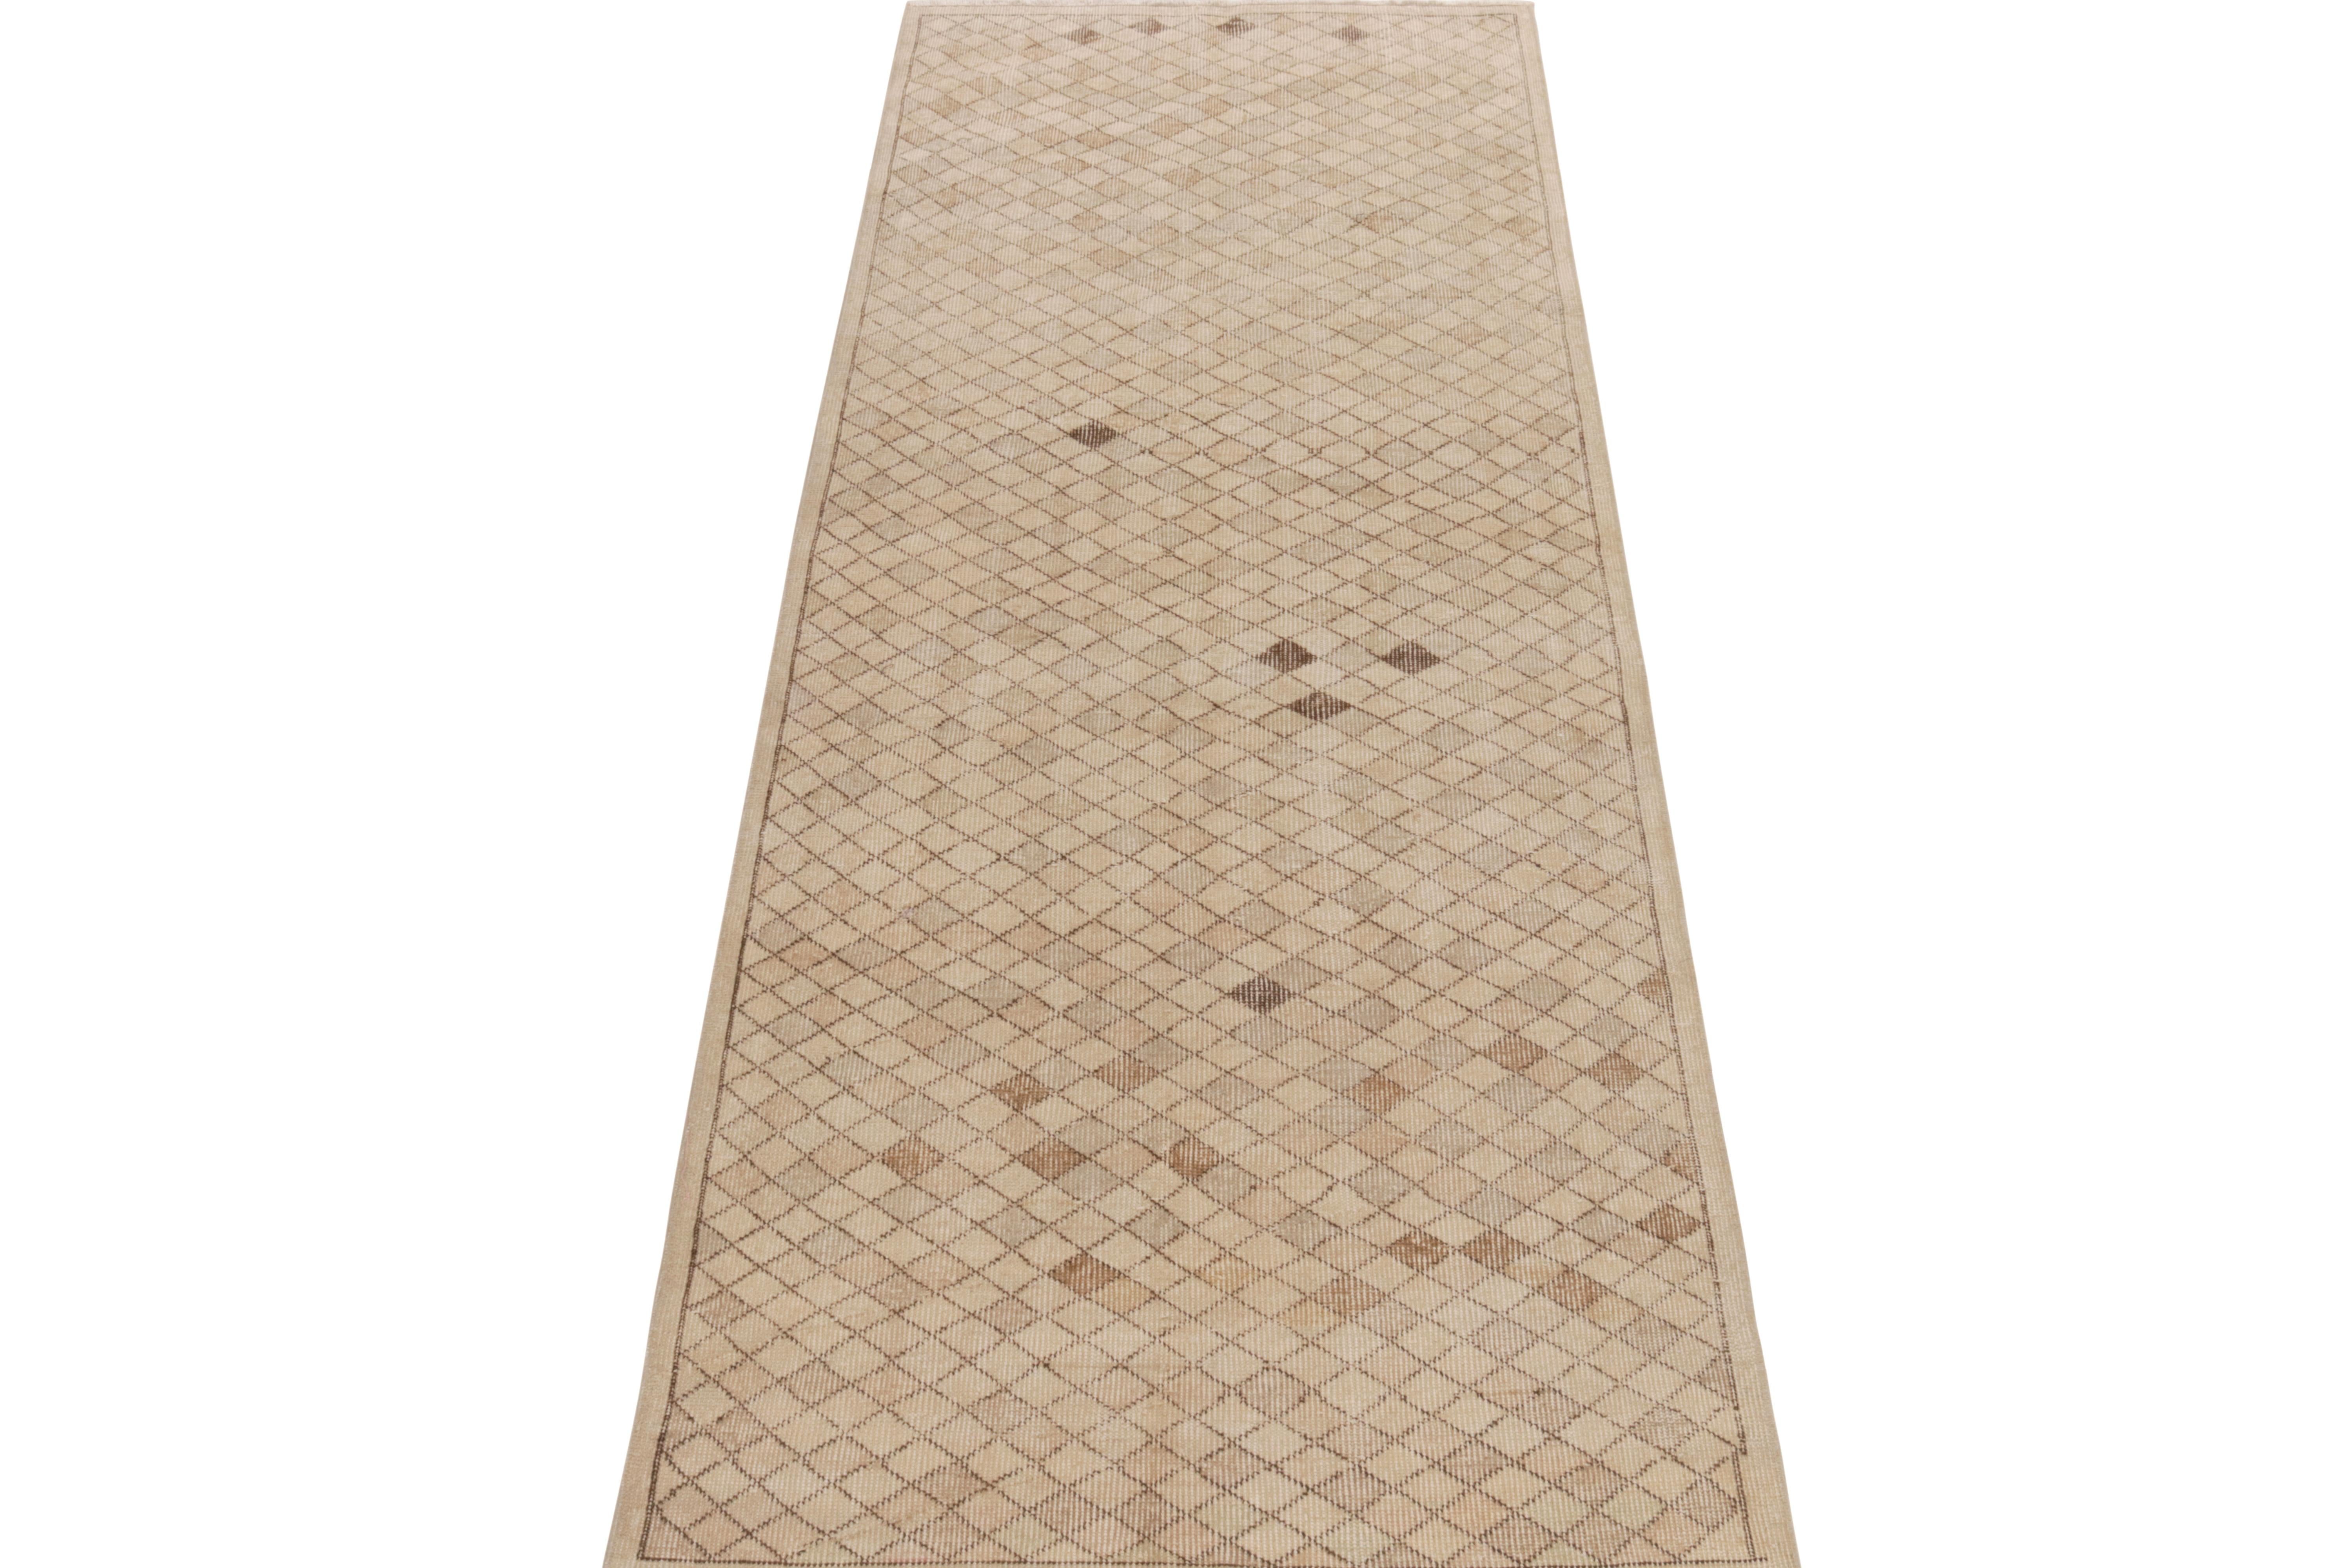 Belonging to Rug & Kilim’s mid century Pasha collection, a 1960s runner celebrating the works of a venerated designer from Turkey. 

Hand-knotted in wool with a low-sheared, distressed textural approach, this 3x9 vintage rug features a geometric